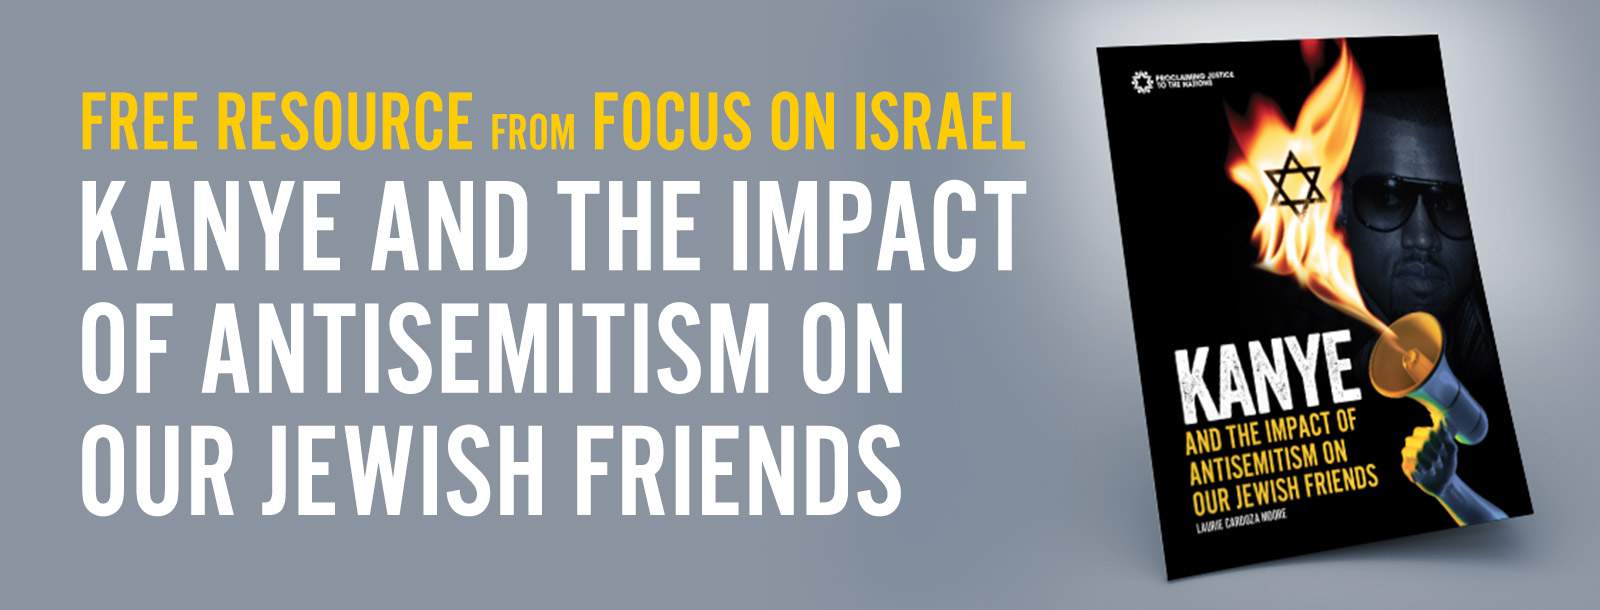 Free Resource from Focus on Israel Kanye and the Impact of Antisemitism on Our Jewish Friends